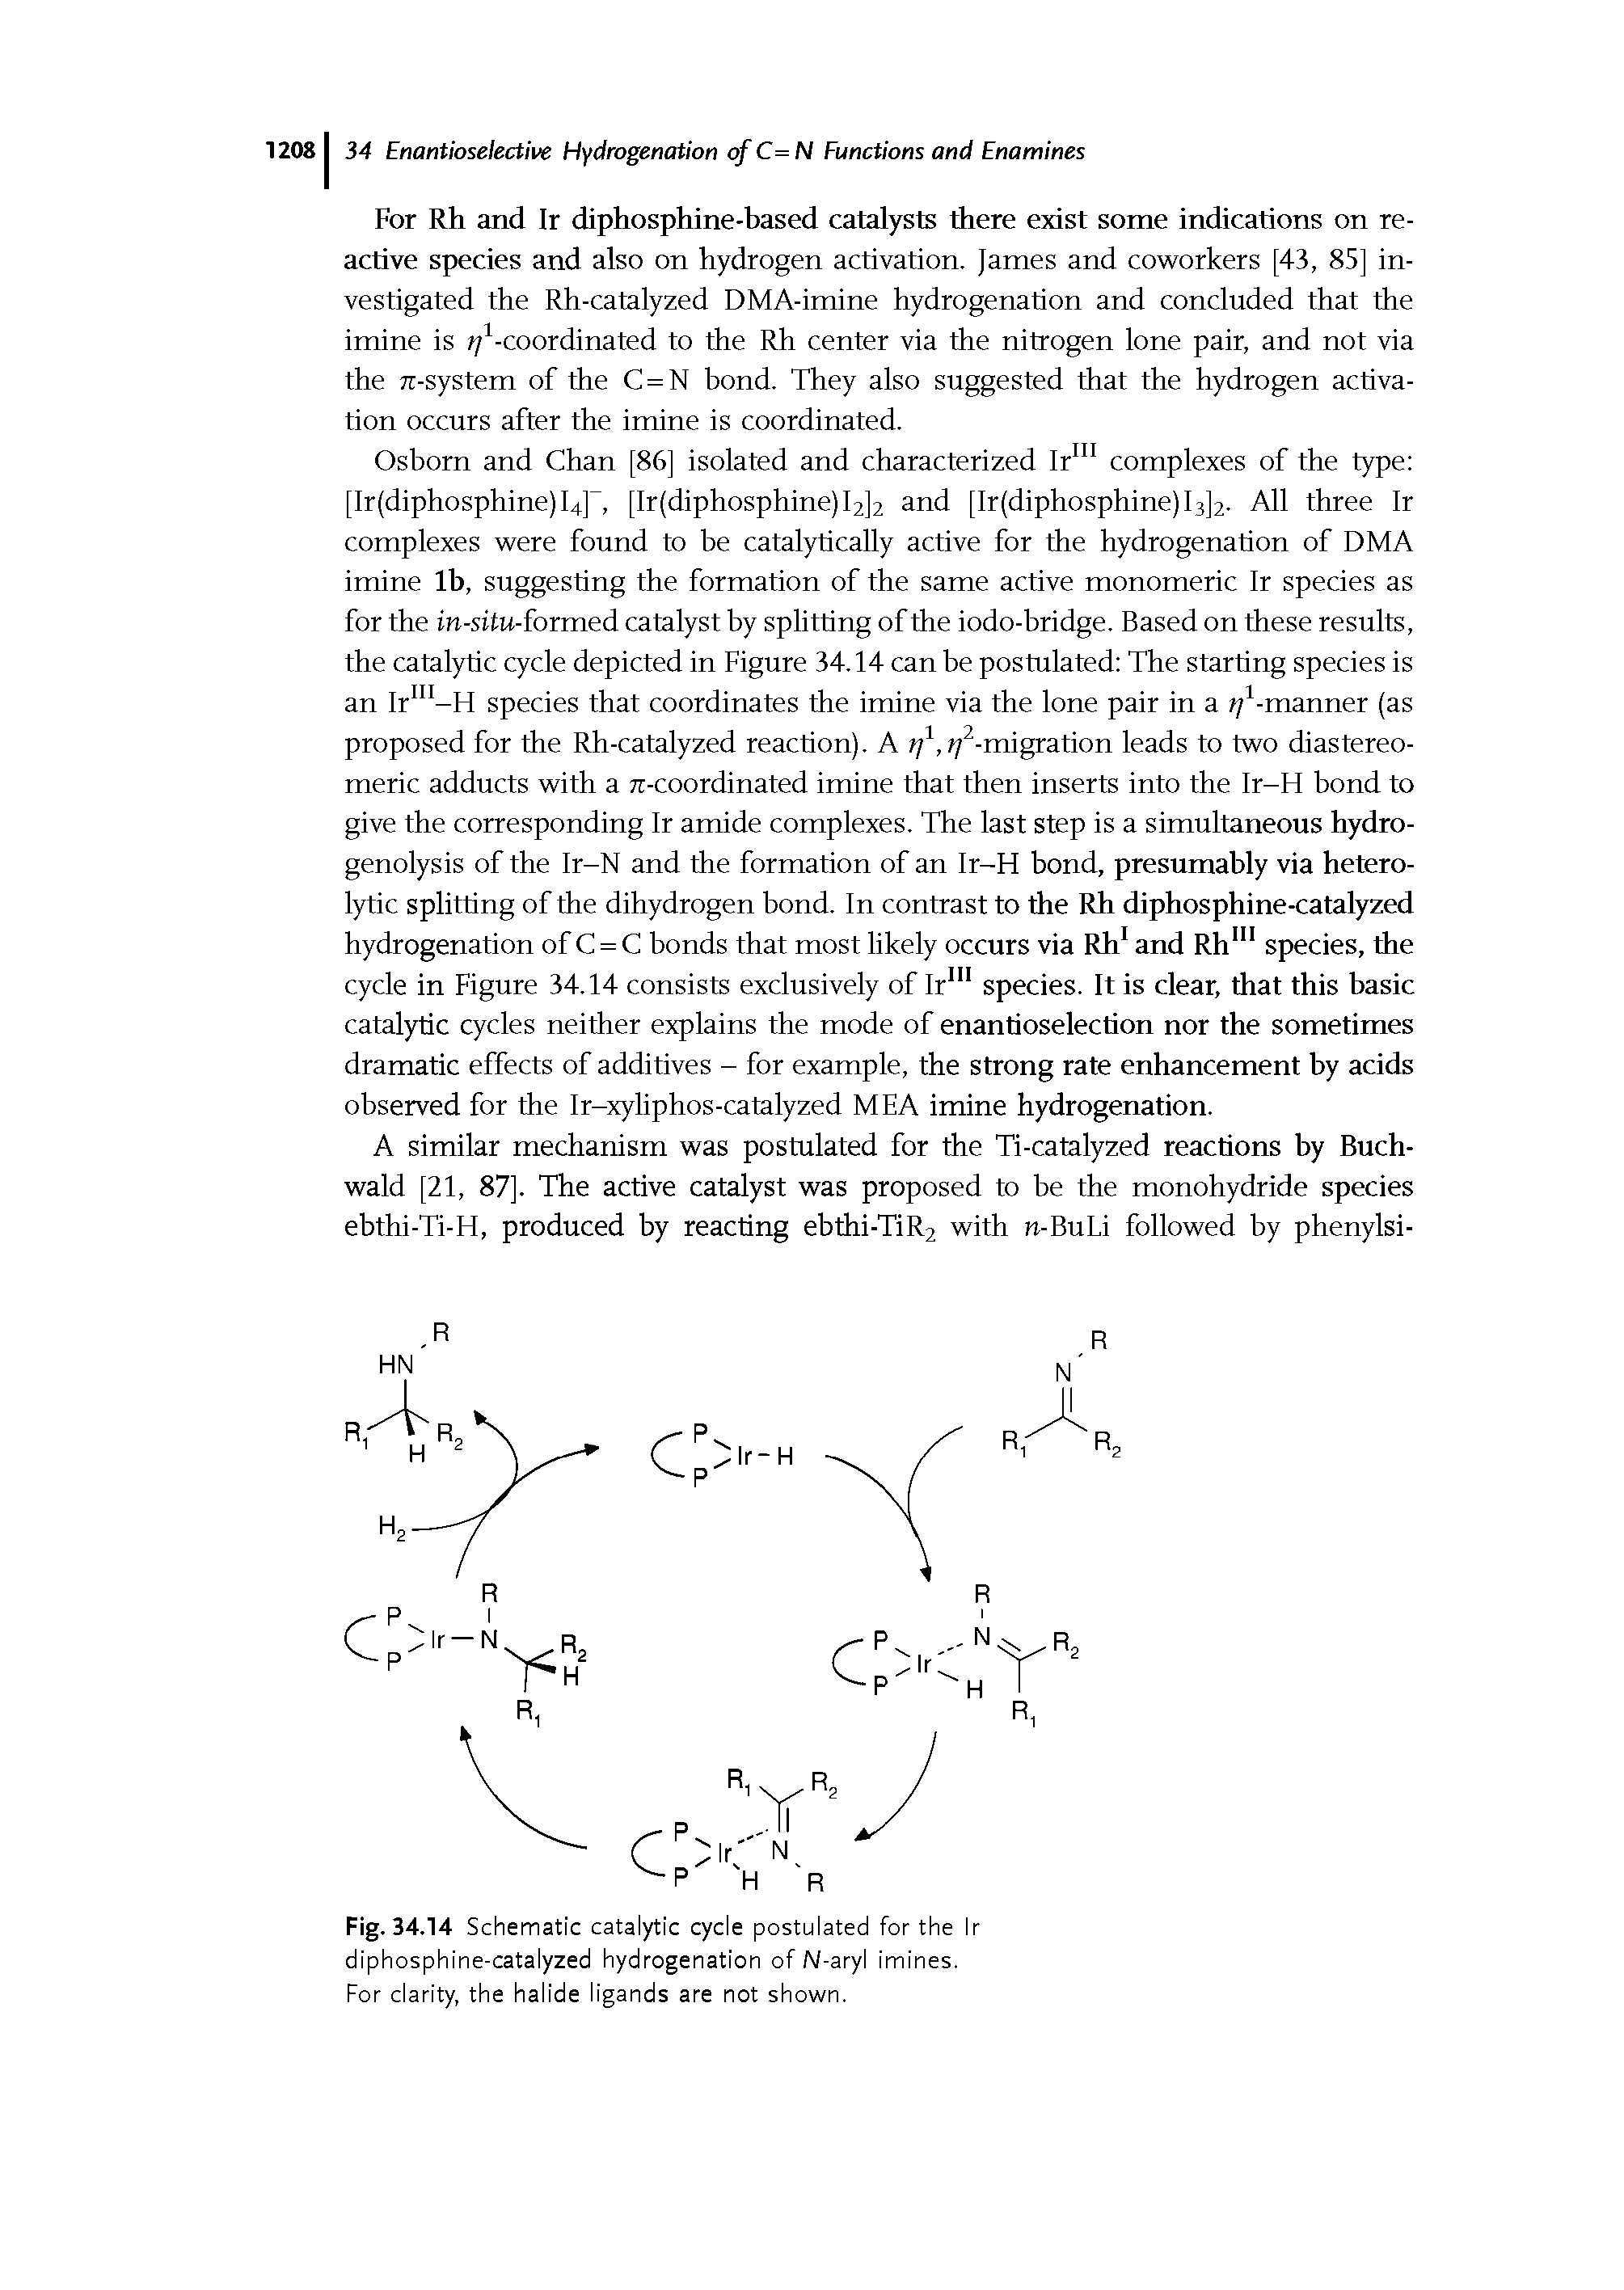 Fig. 34.14 Schematic catalytic cycle postulated for the Ir diphosphine-catalyzed hydrogenation of N-aryl imines. For clarity, the halide ligands are not shown.